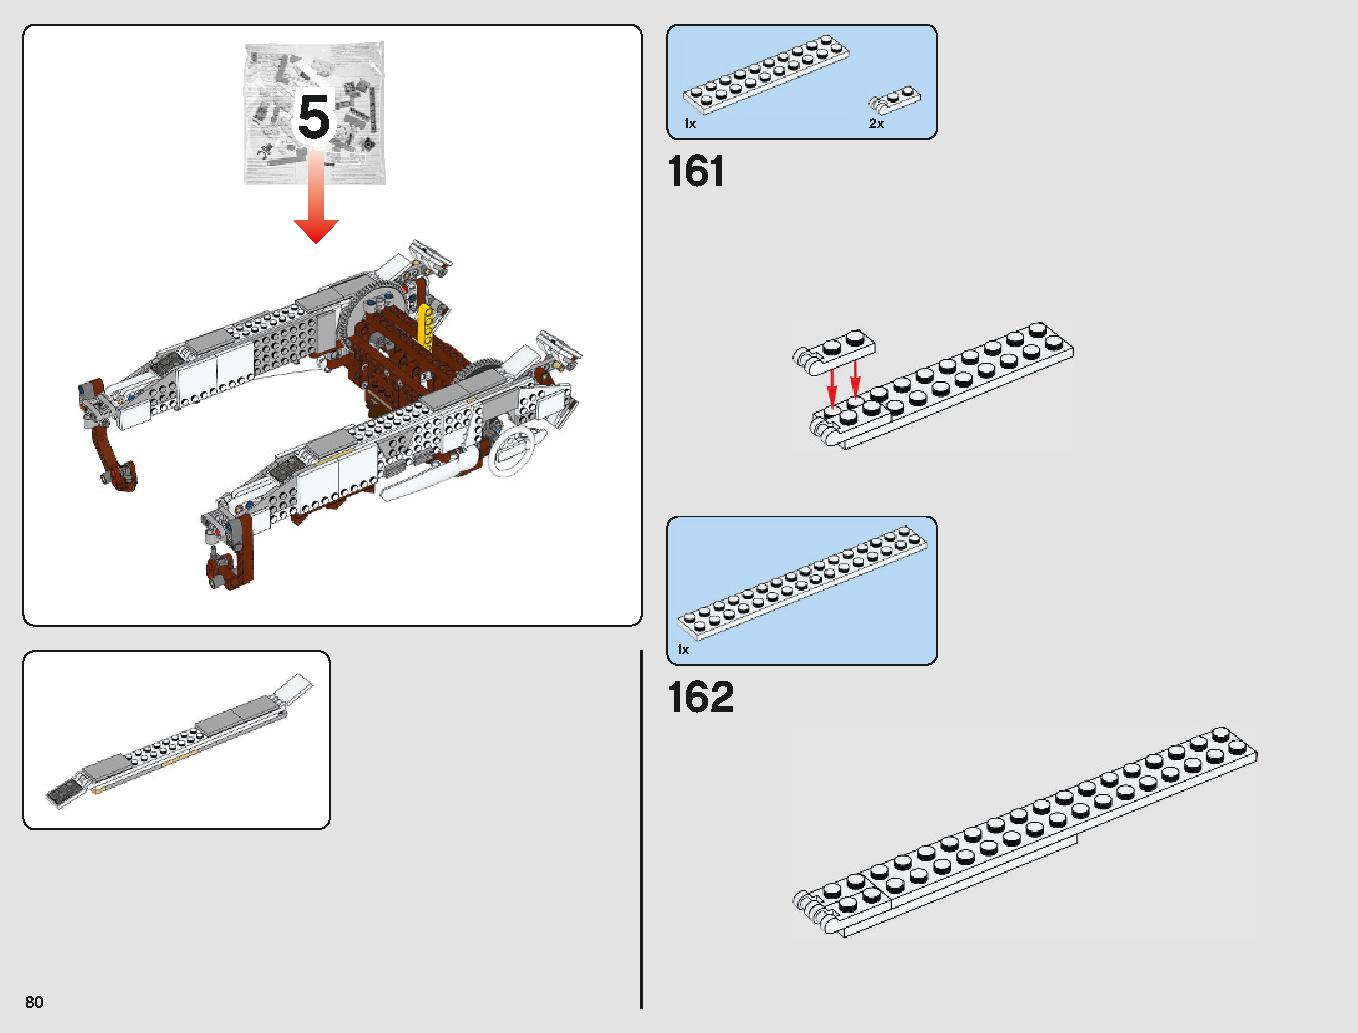 Imperial AT-Hauler 75219 LEGO information LEGO instructions 80 page